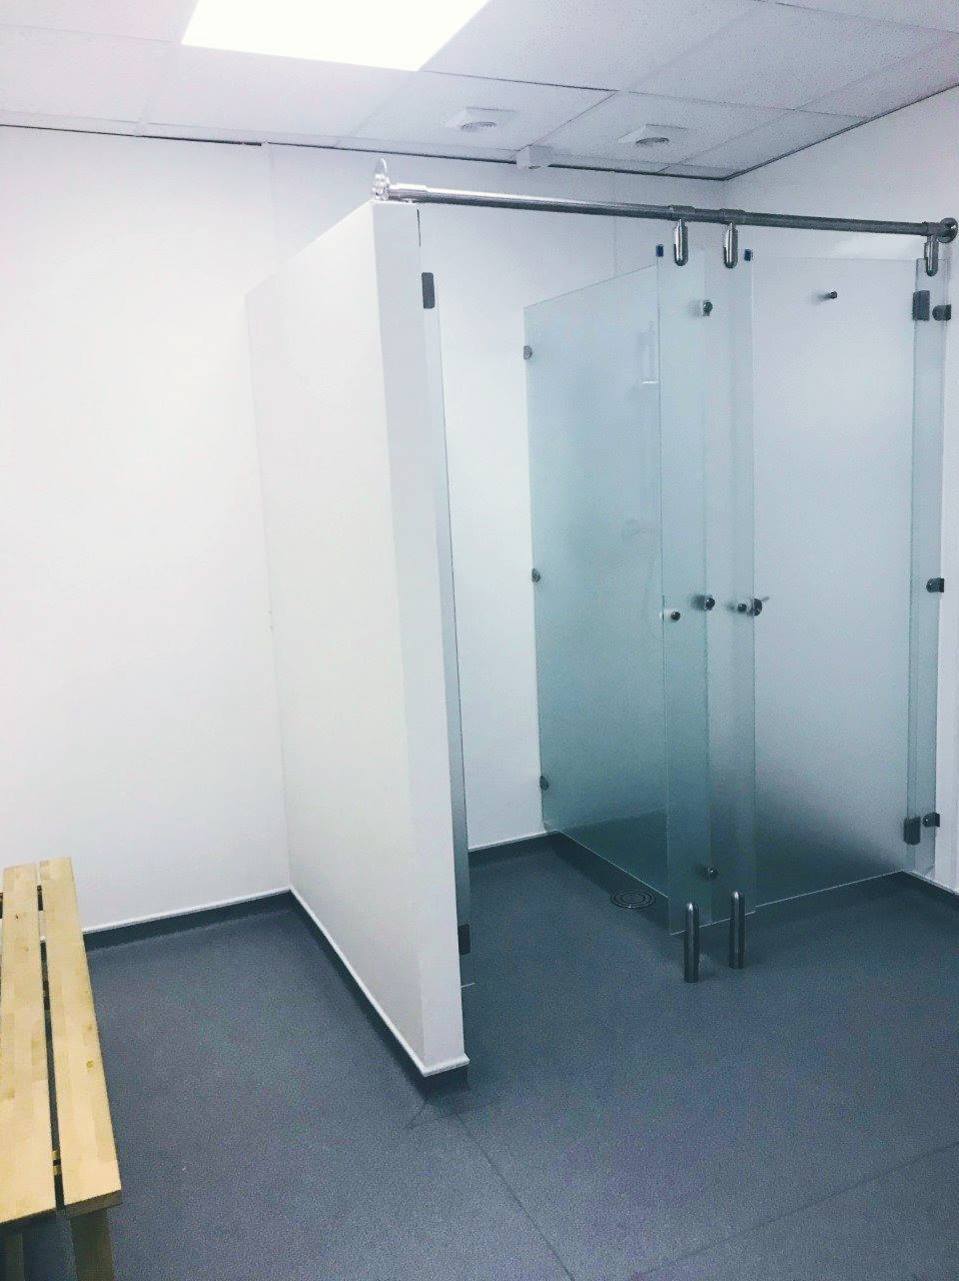 Shower cubicle easy clean, hygienic opaque panels and doors fitted.